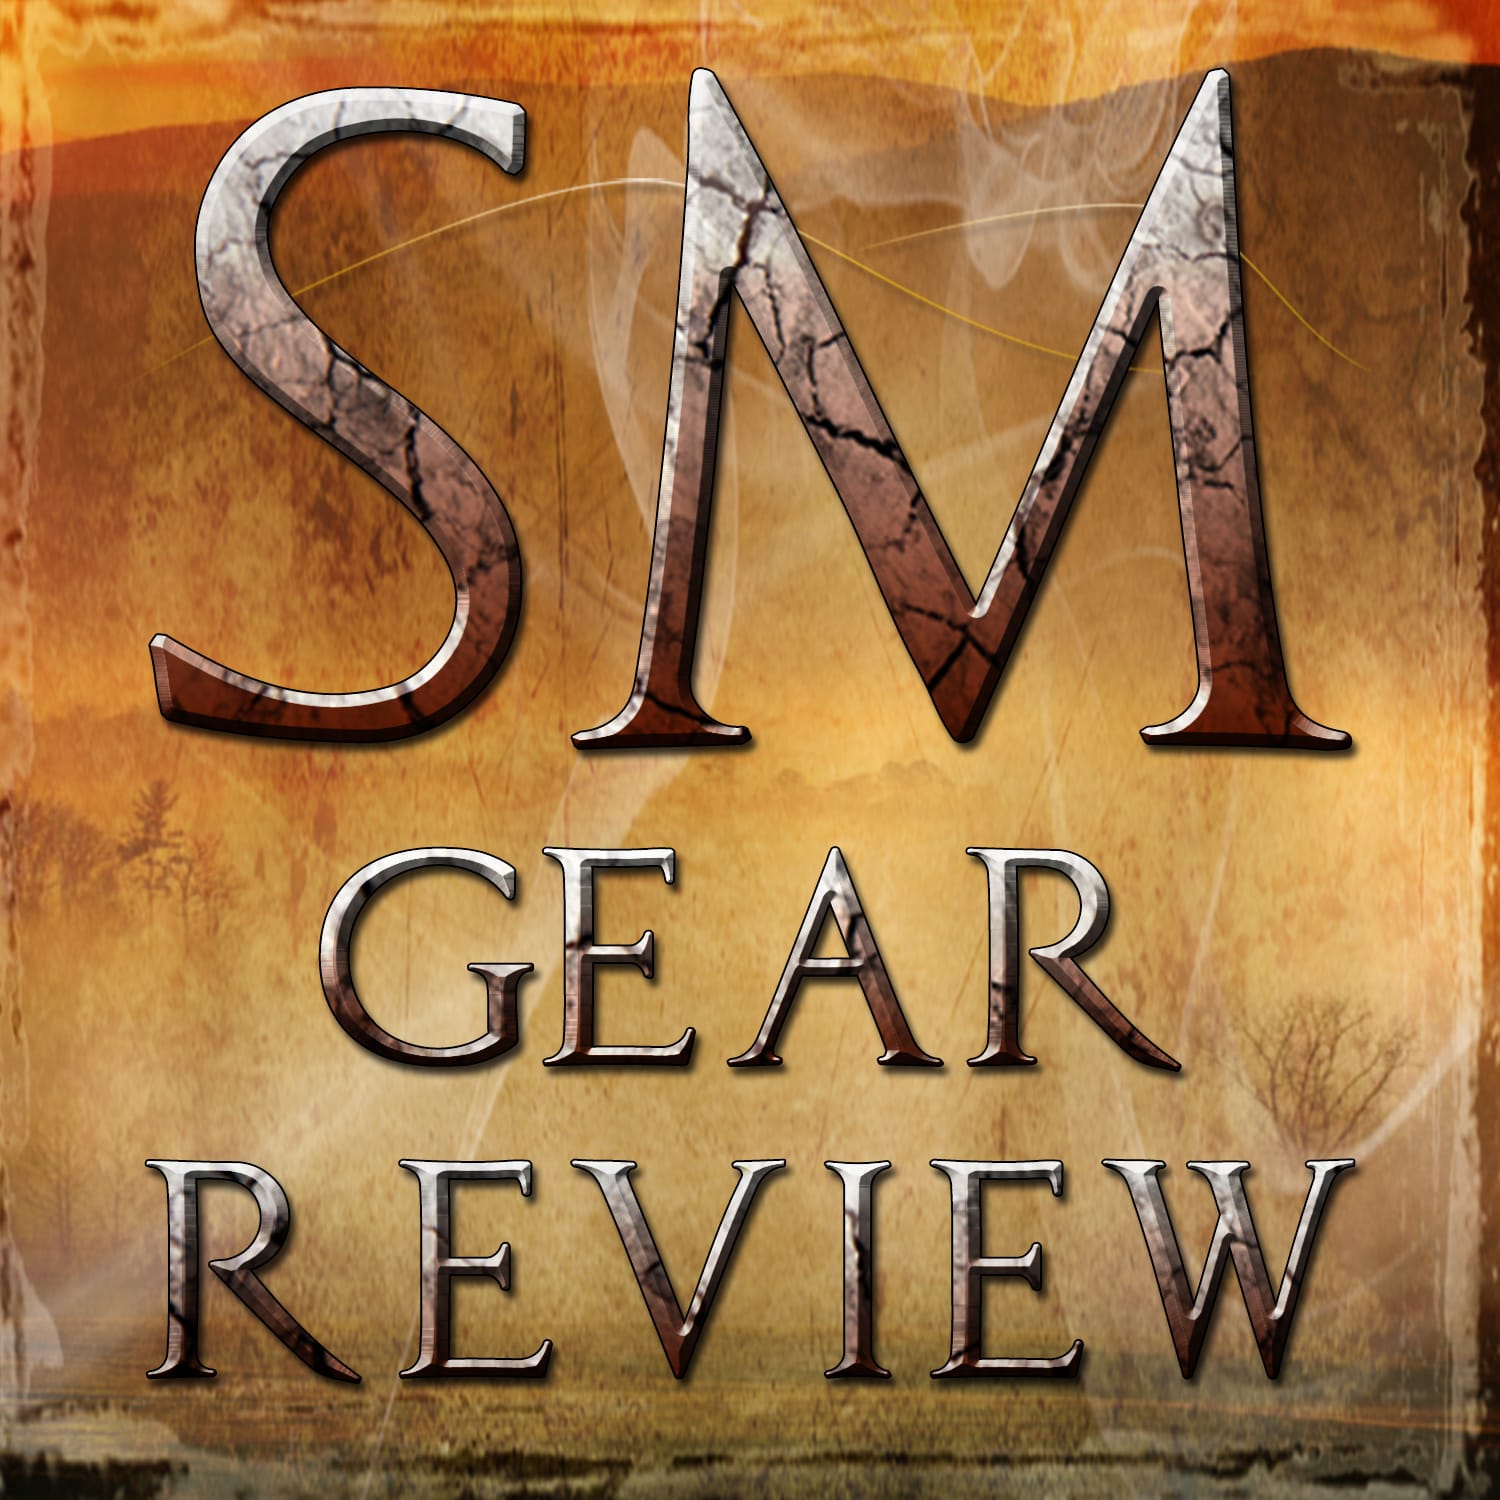 Smoky Mountain Gear Review Square